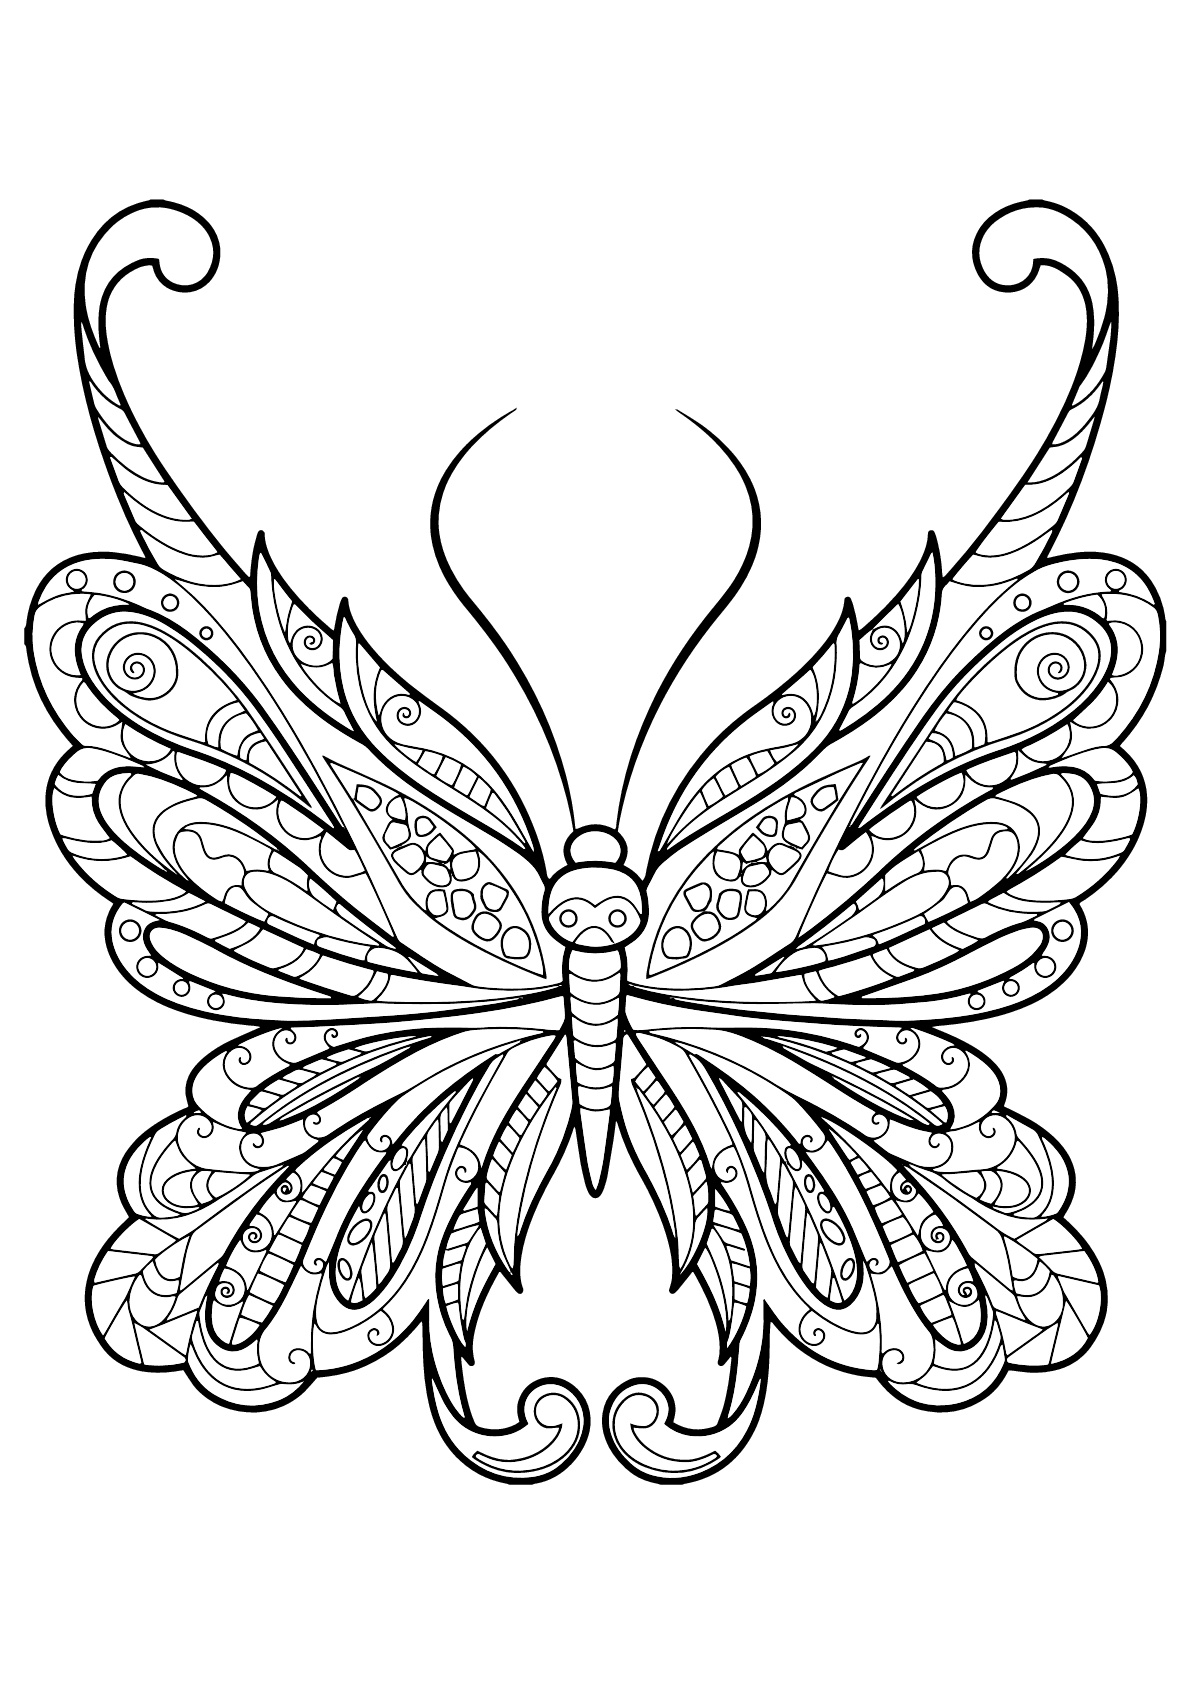 Butterfly beautiful patterns - 18 - Butterflies & insects Adult ...